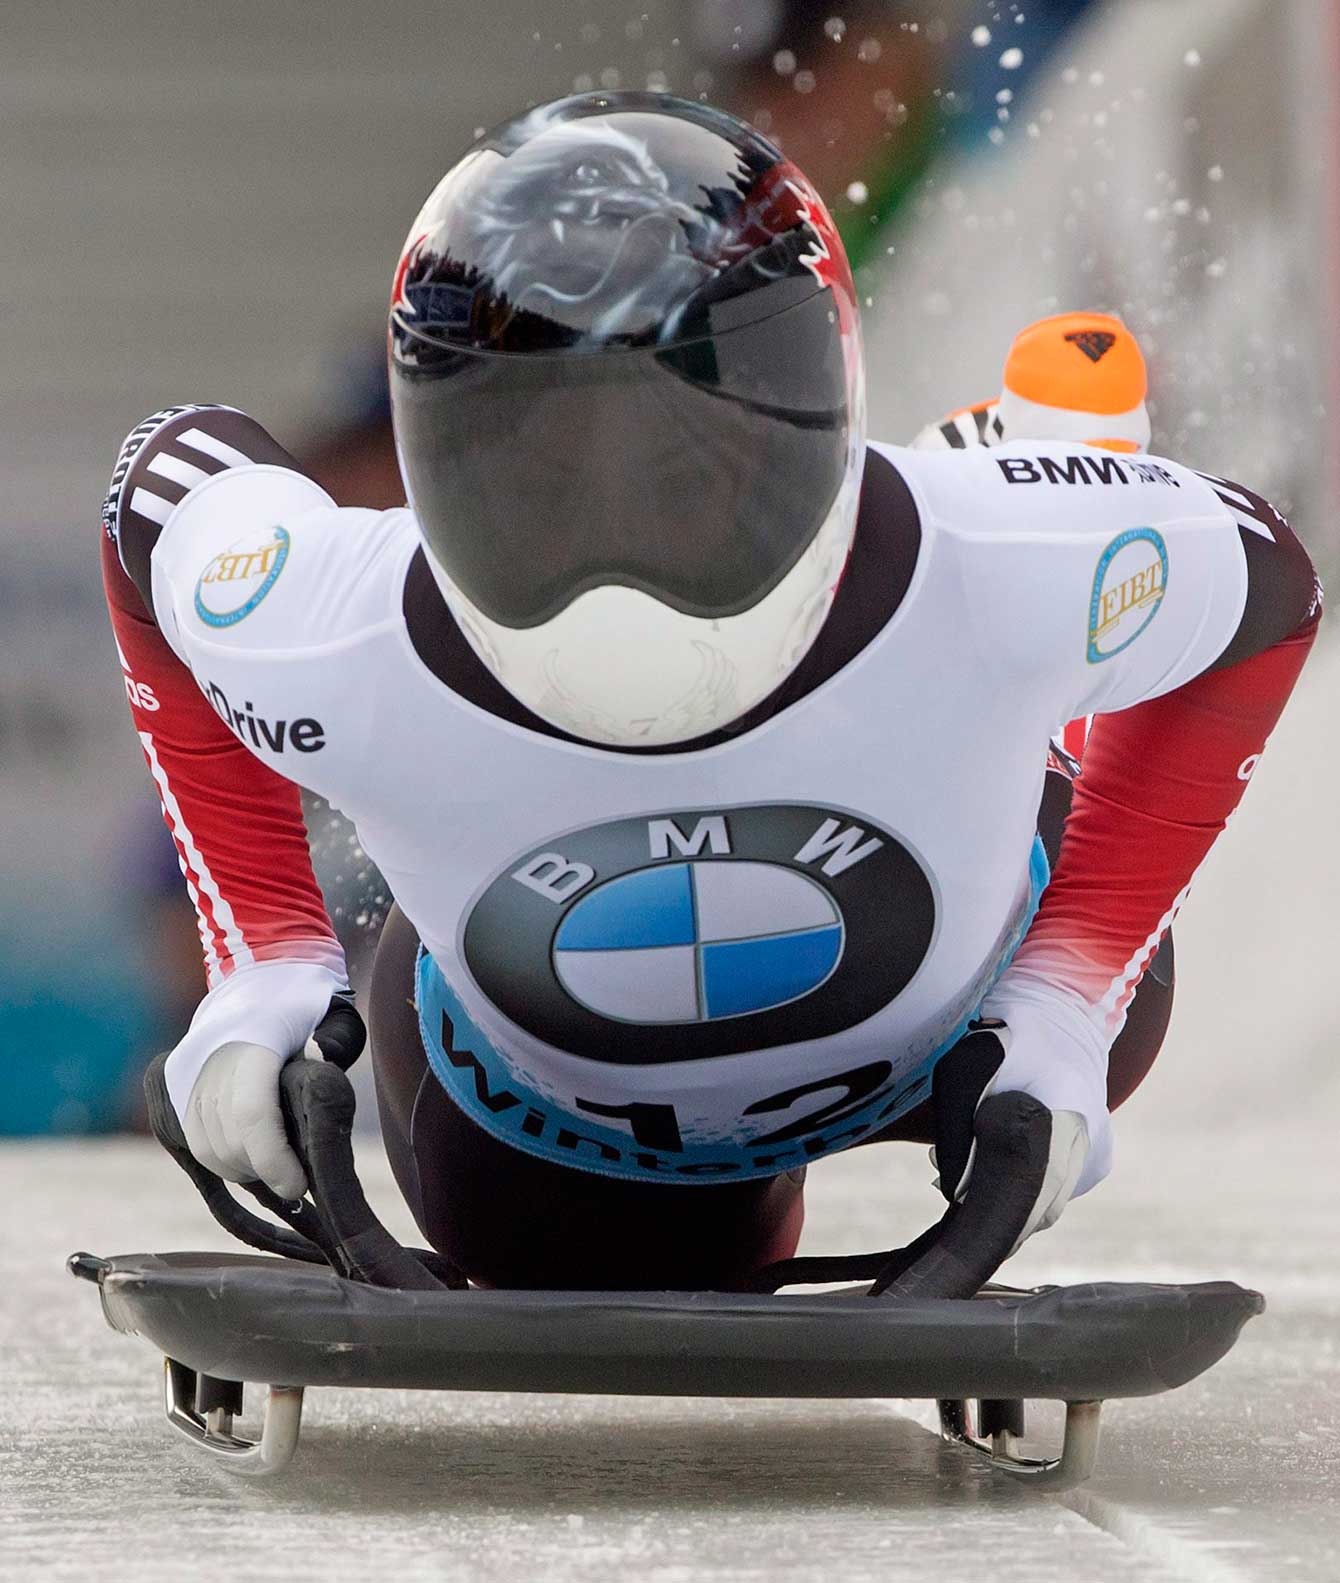 Jane Channell of Canada starts during her third run in the women's skeleton race at the Bob and Skeleton World Championships in Winterberg, Germany, Saturday, March 7, 2015. (AP Photo/Jens Meyer)